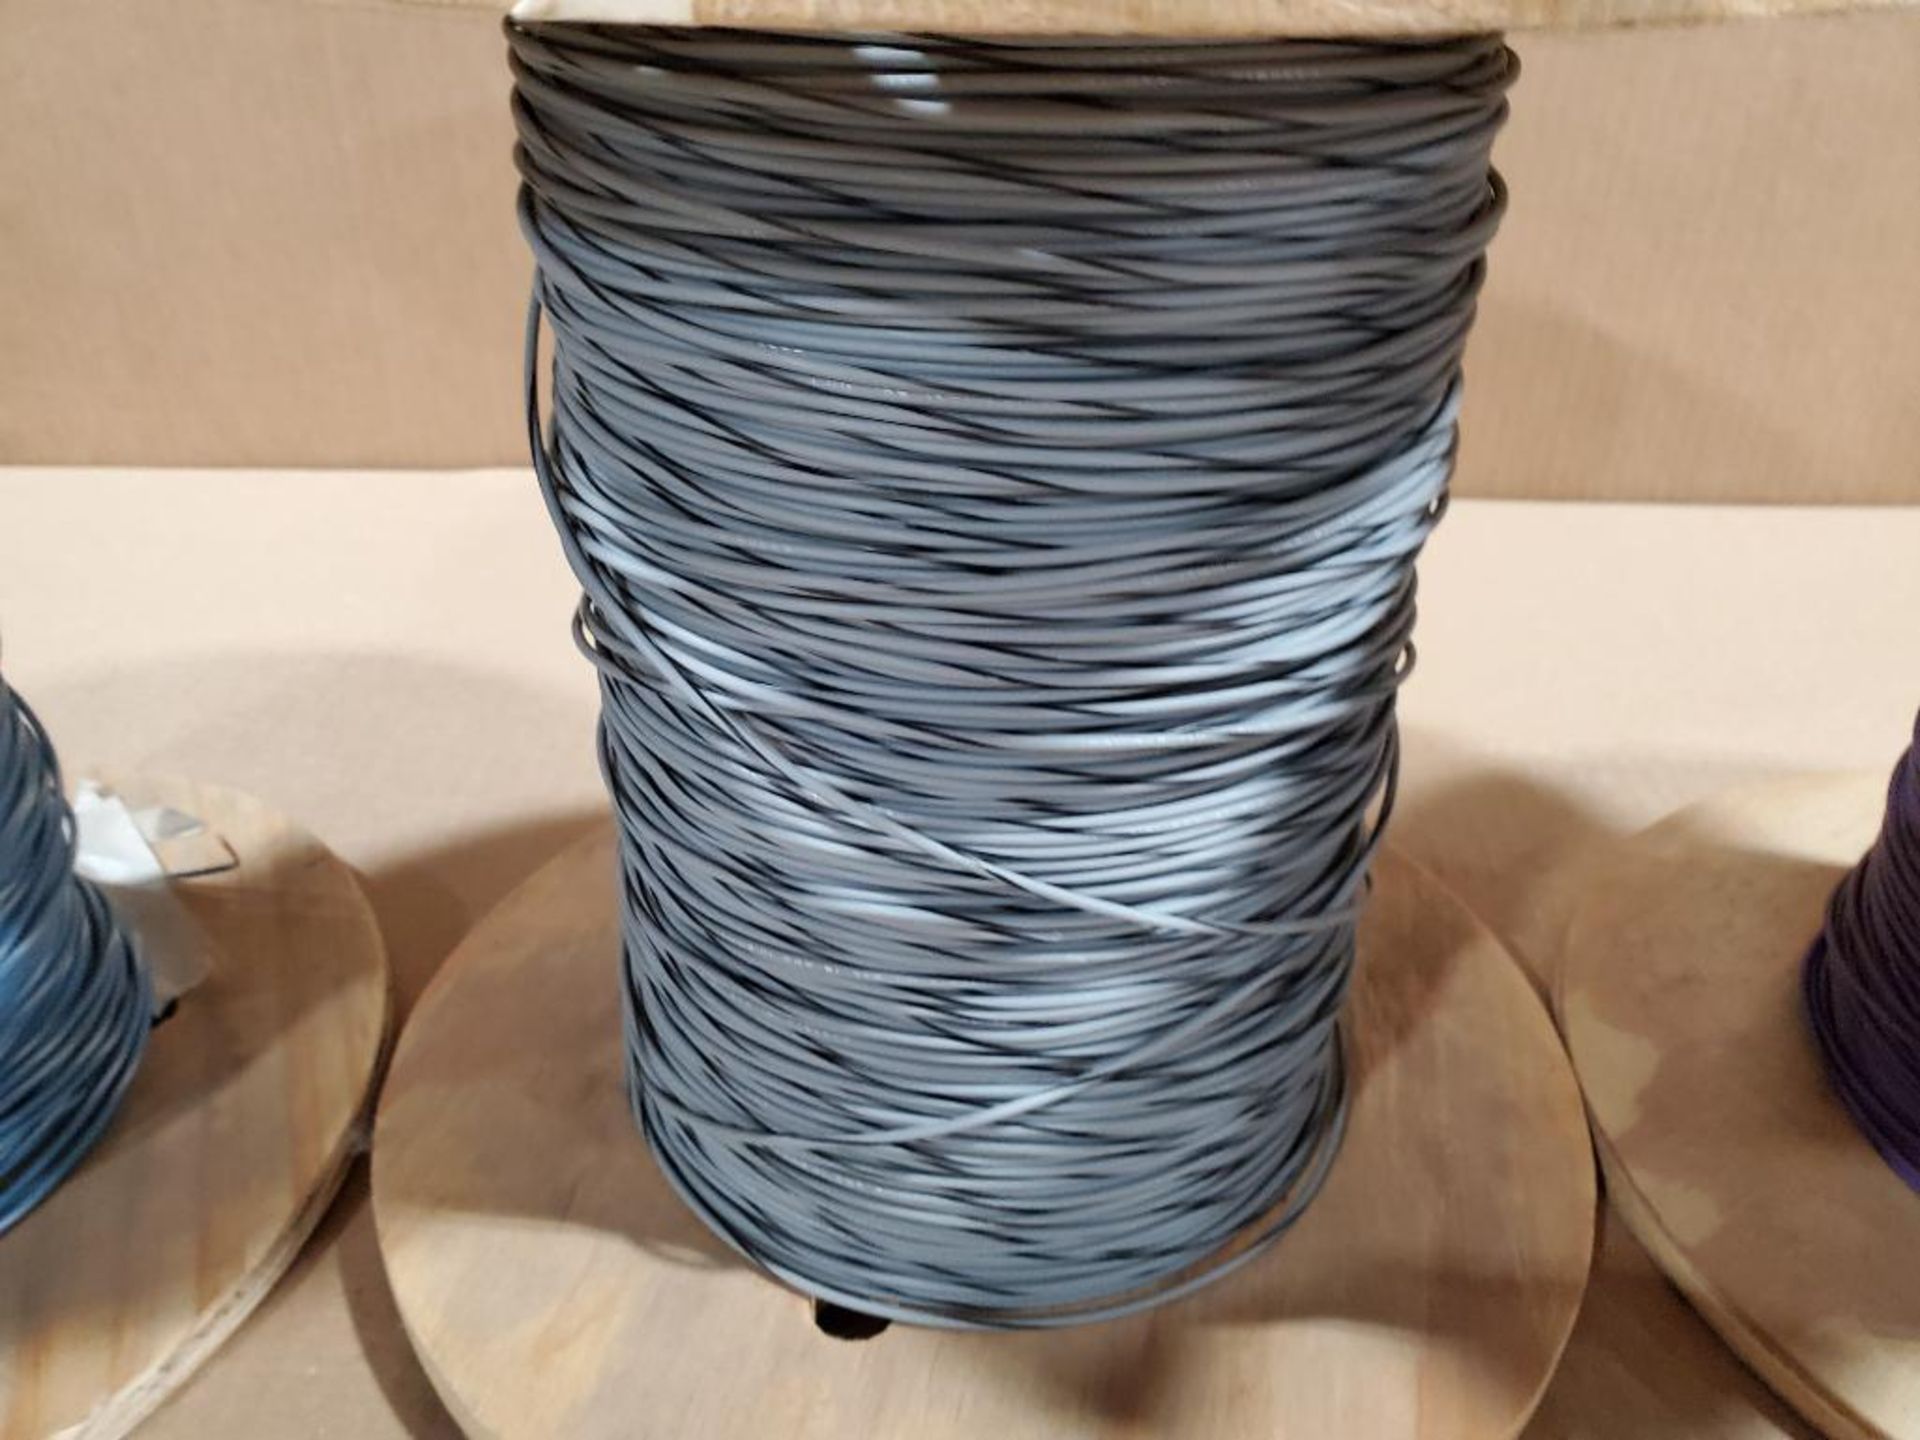 Qty 4 - Rolls assorted wire. 35lbs total gross weight. - Image 7 of 10